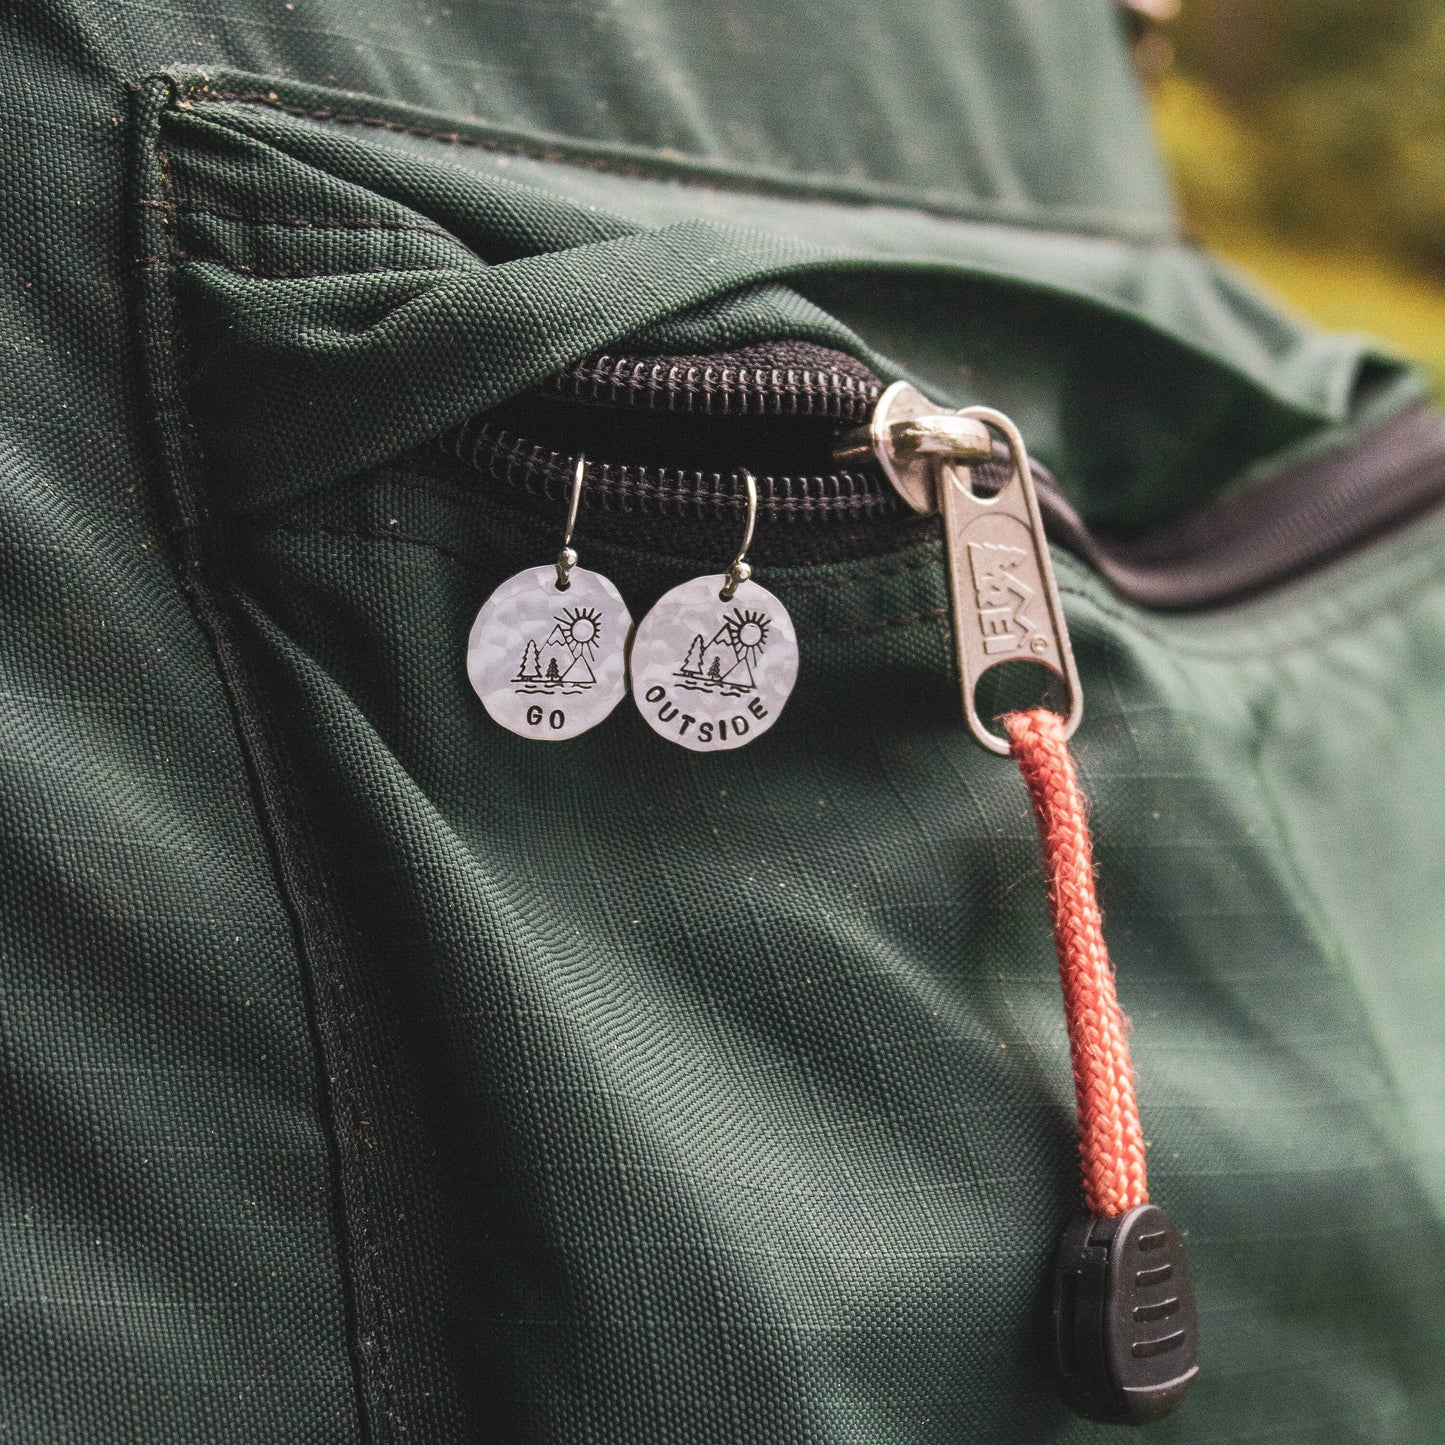 GO OUTSIDE Sterling Silver Earrings, Mountain Hiker Jewelry, Hand Stamped Personalized Earrings, Happy Camper Jewelry Camping Gift for Her